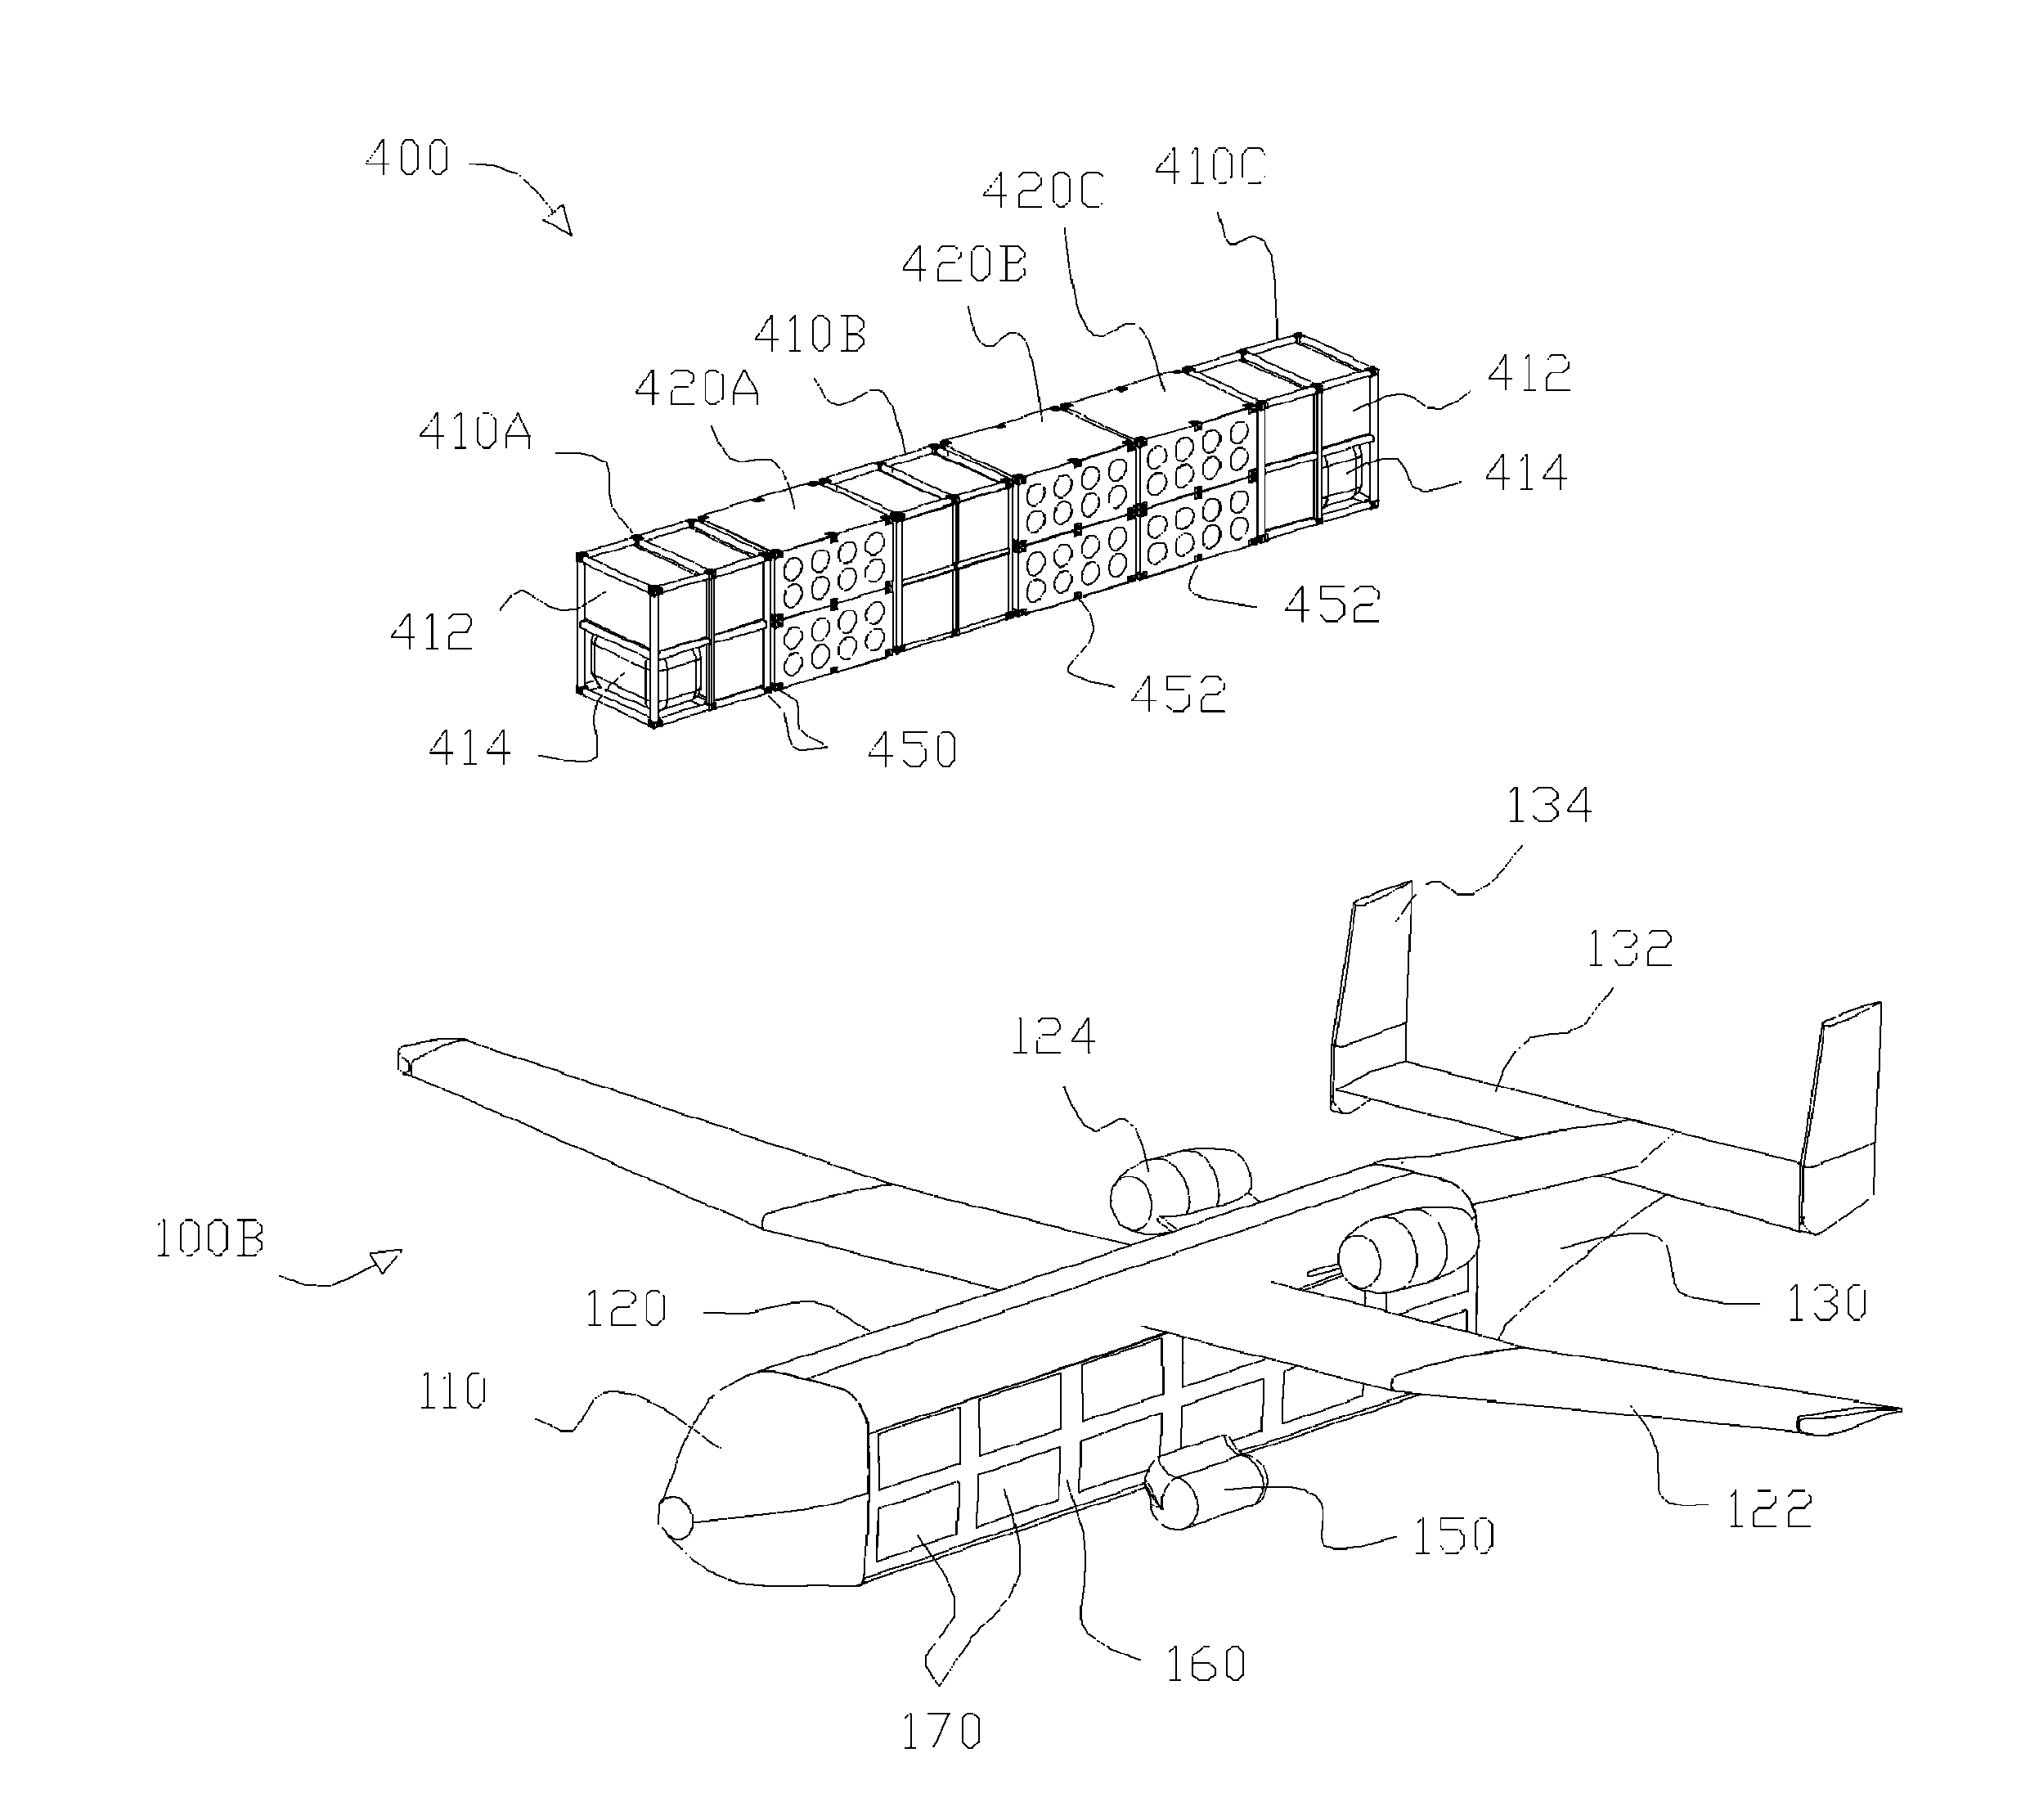 Method and system for loading and unloading cargo assembly onto and from an aircraft